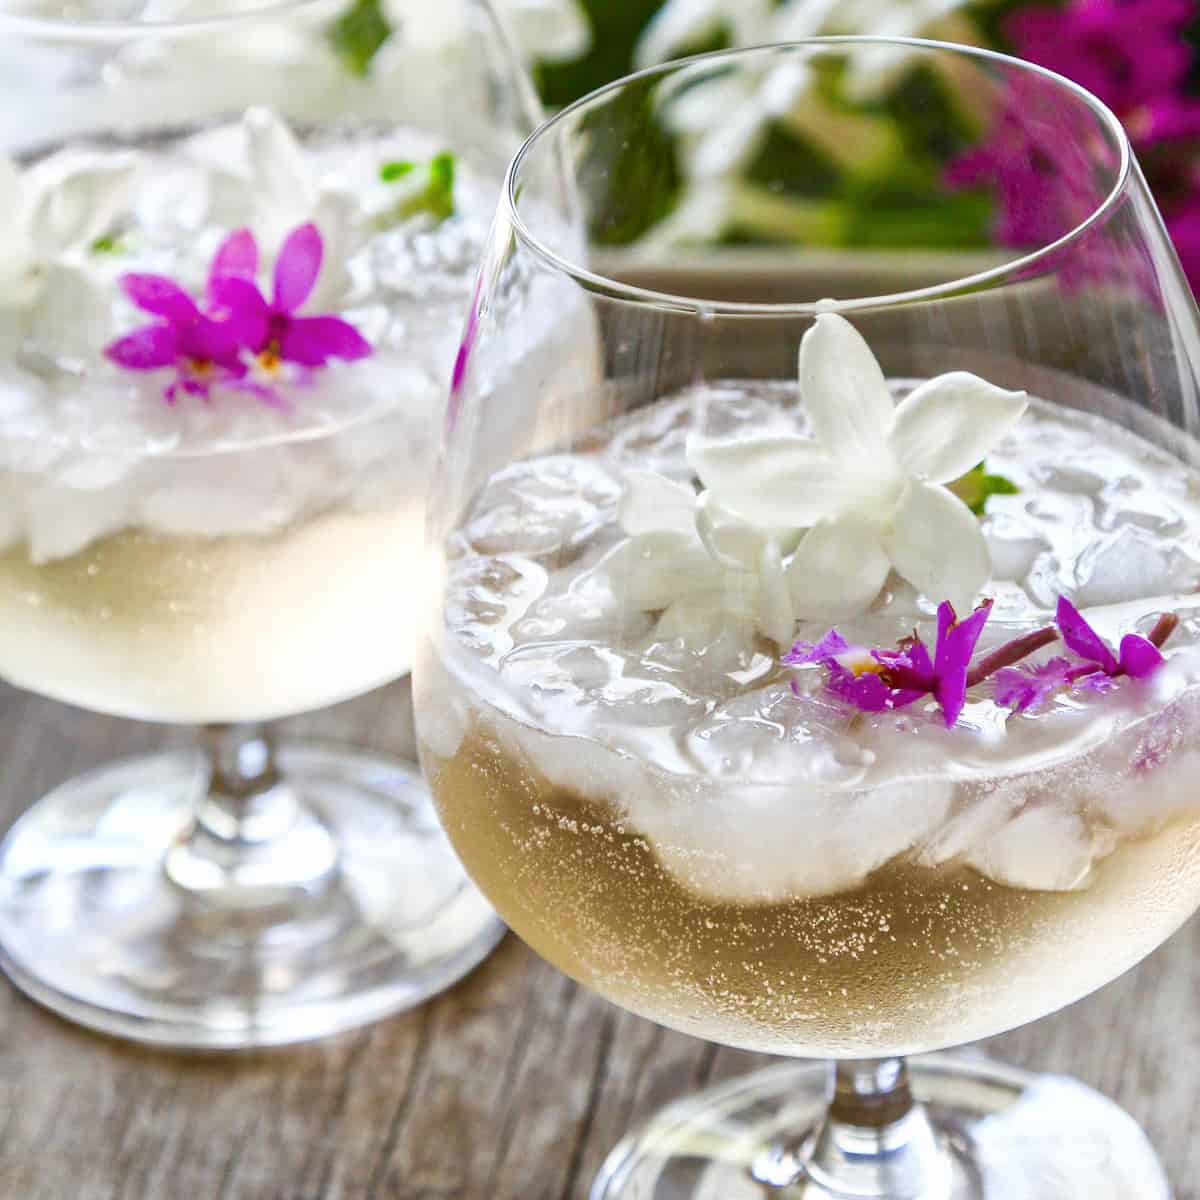 Two glasses filled with St Germain cocktails garnished with tiny purple orchids and white jasmine flowers.